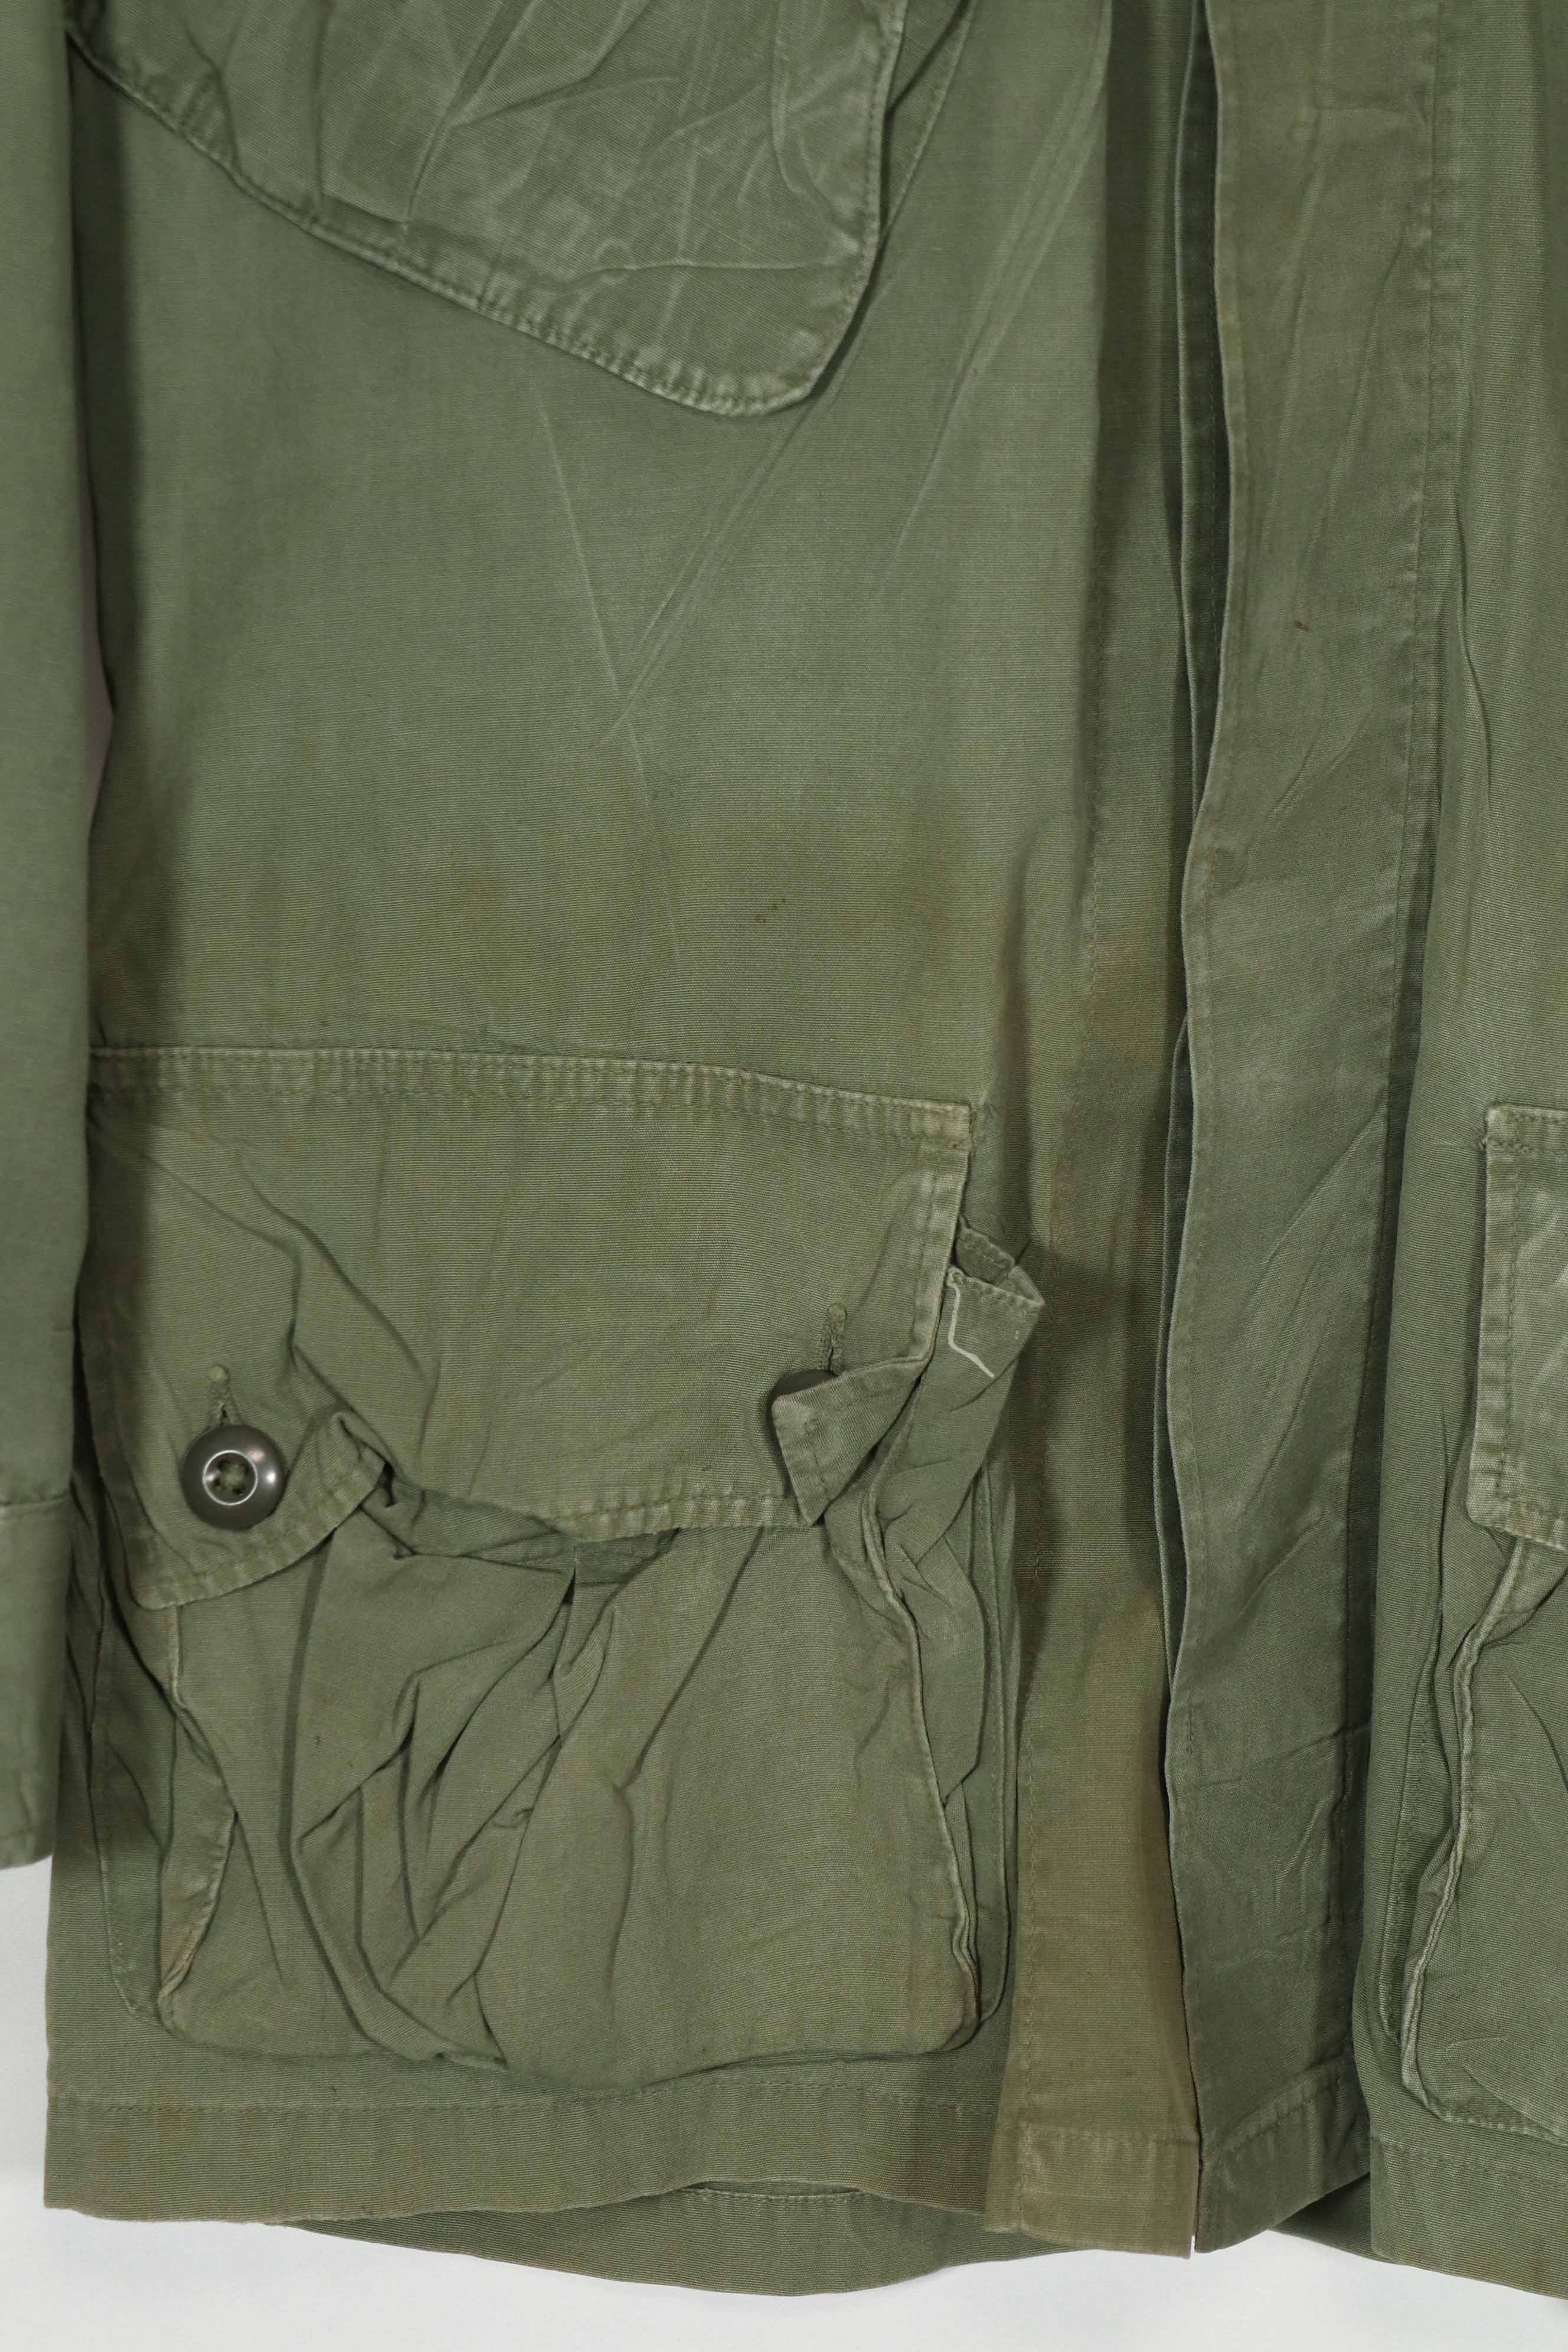 Real 1st Model Jungle Fatigue Jacket, used, no size tag.